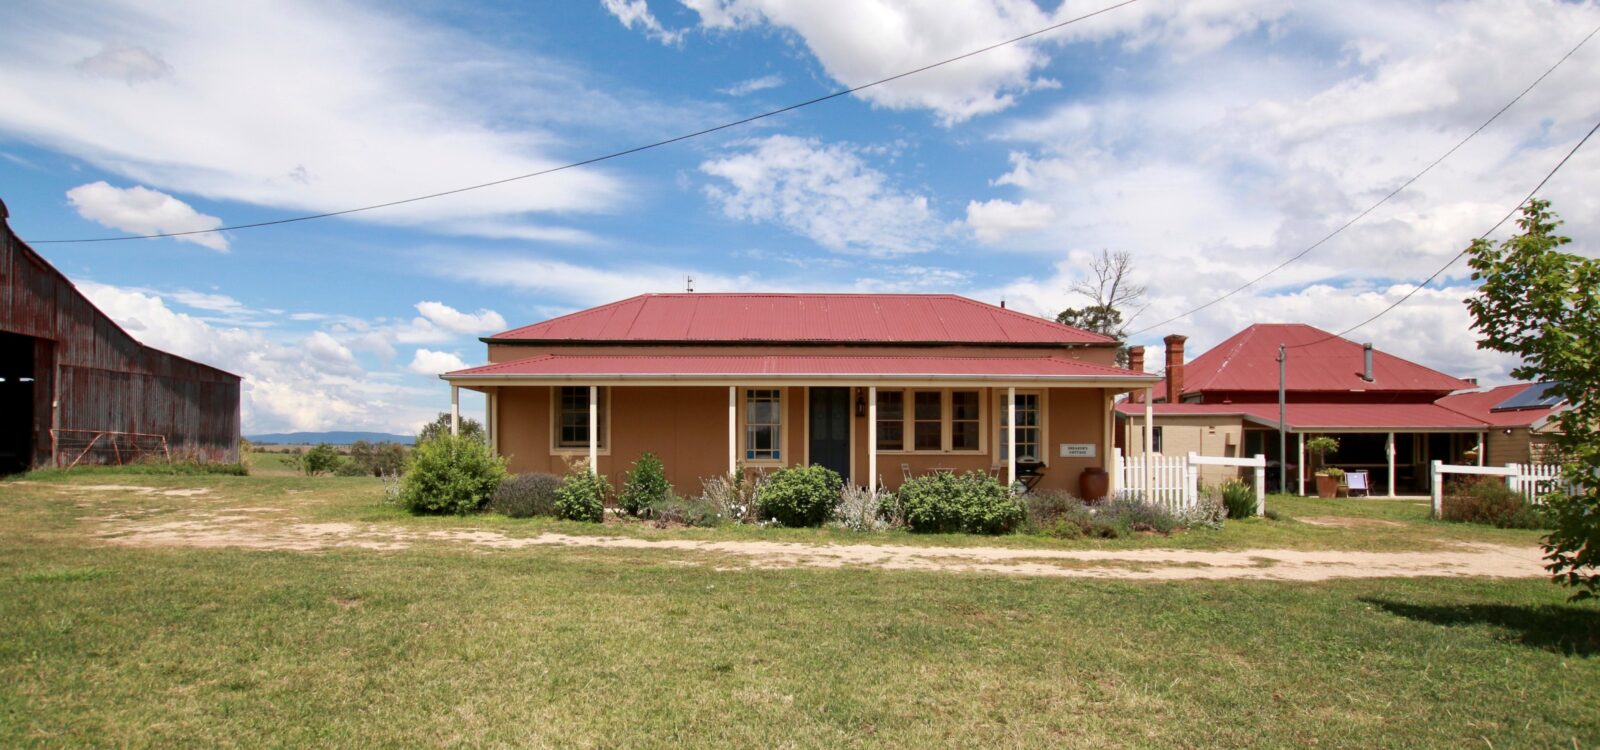 Red brick home, paddock, red tin roof